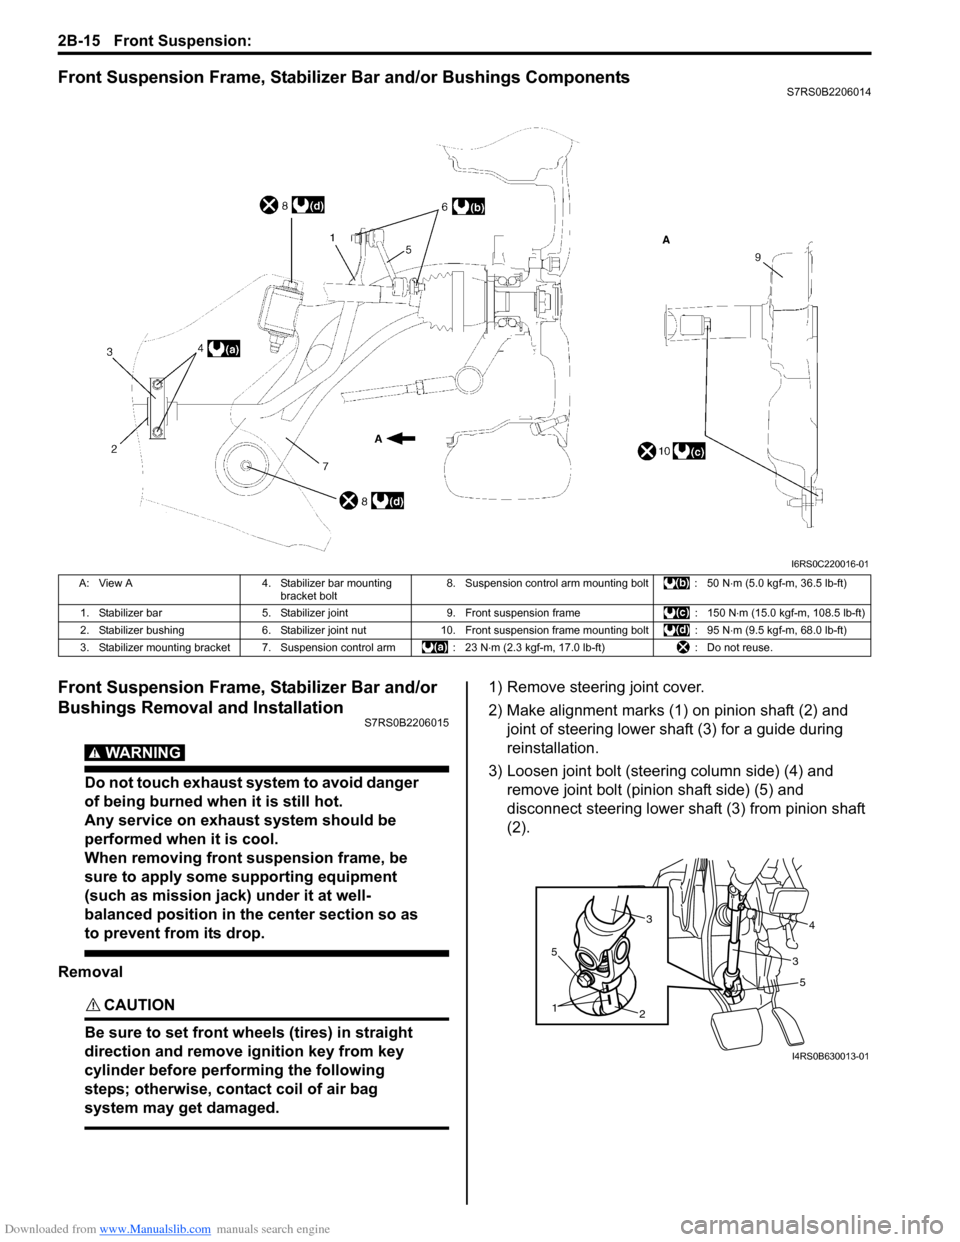 SUZUKI SWIFT 2006 2.G Service Owners Manual Downloaded from www.Manualslib.com manuals search engine 2B-15 Front Suspension: 
Front Suspension Frame, Stabilizer Bar and/or Bushings ComponentsS7RS0B2206014
Front Suspension Frame, Stabilizer Bar 